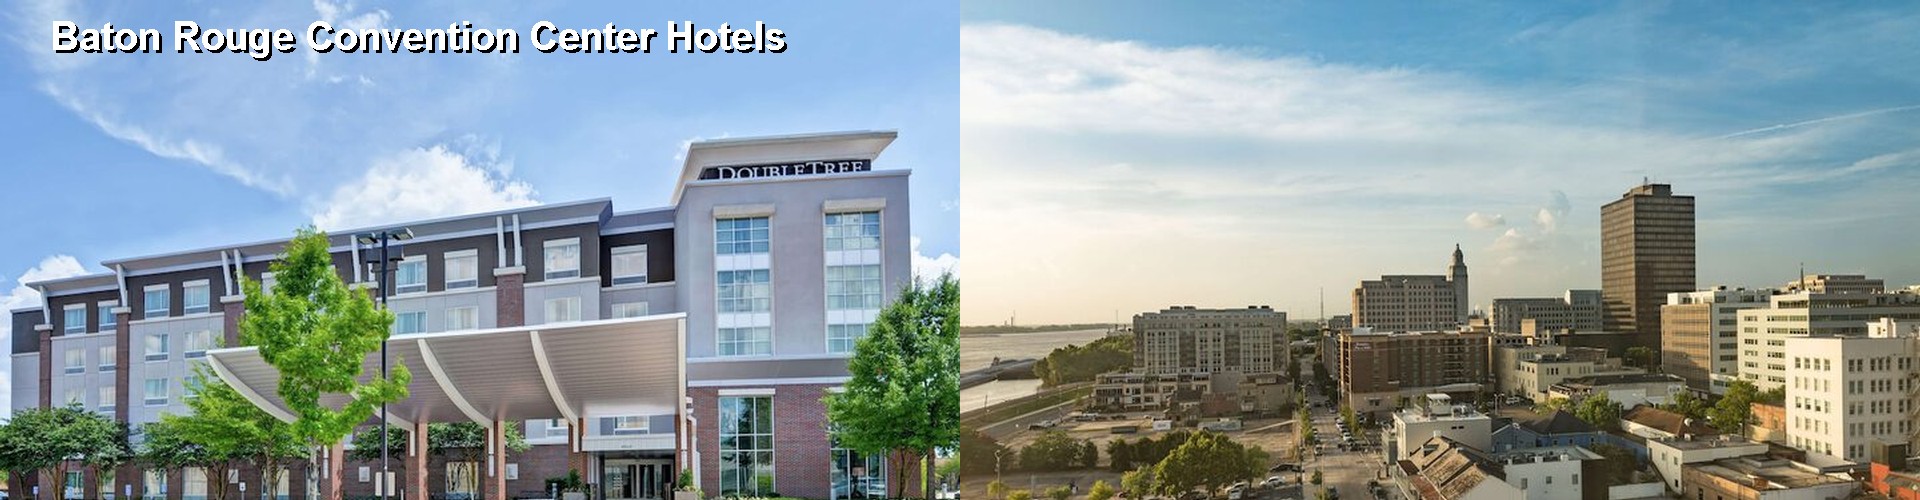 5 Best Hotels near Baton Rouge Convention Center